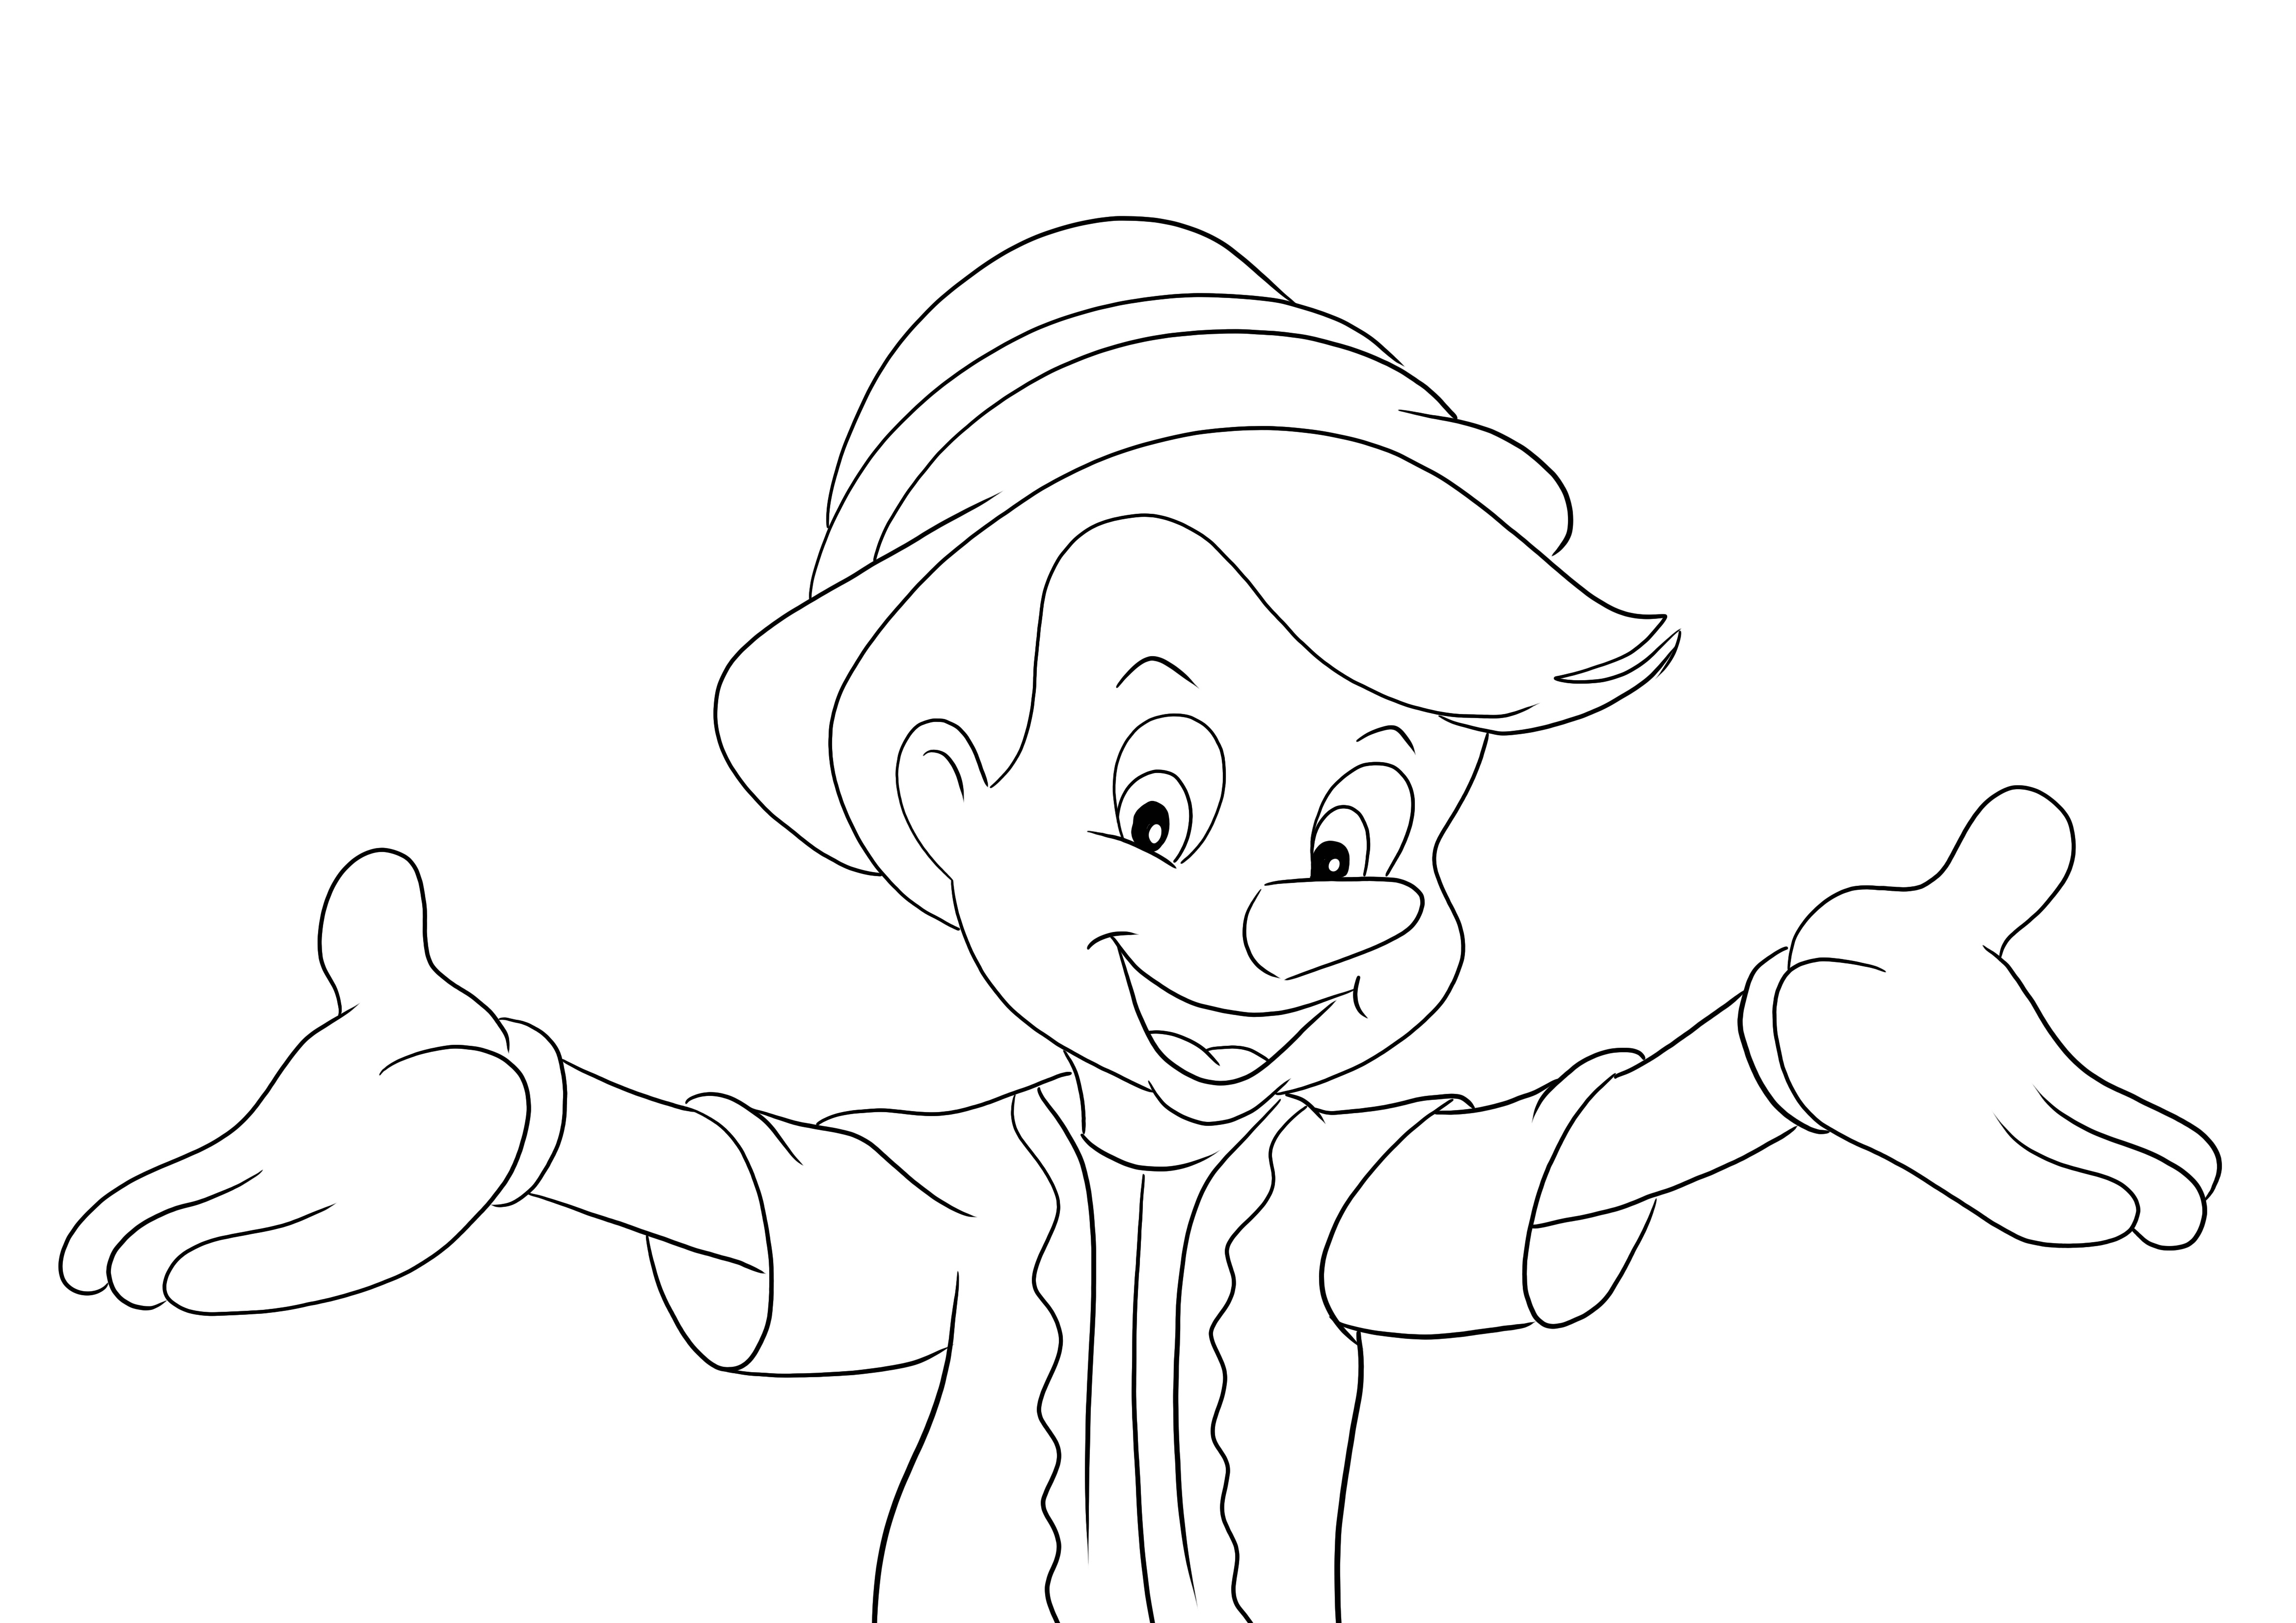 Pinocchio and open hands-free printable and coloring picture for kids